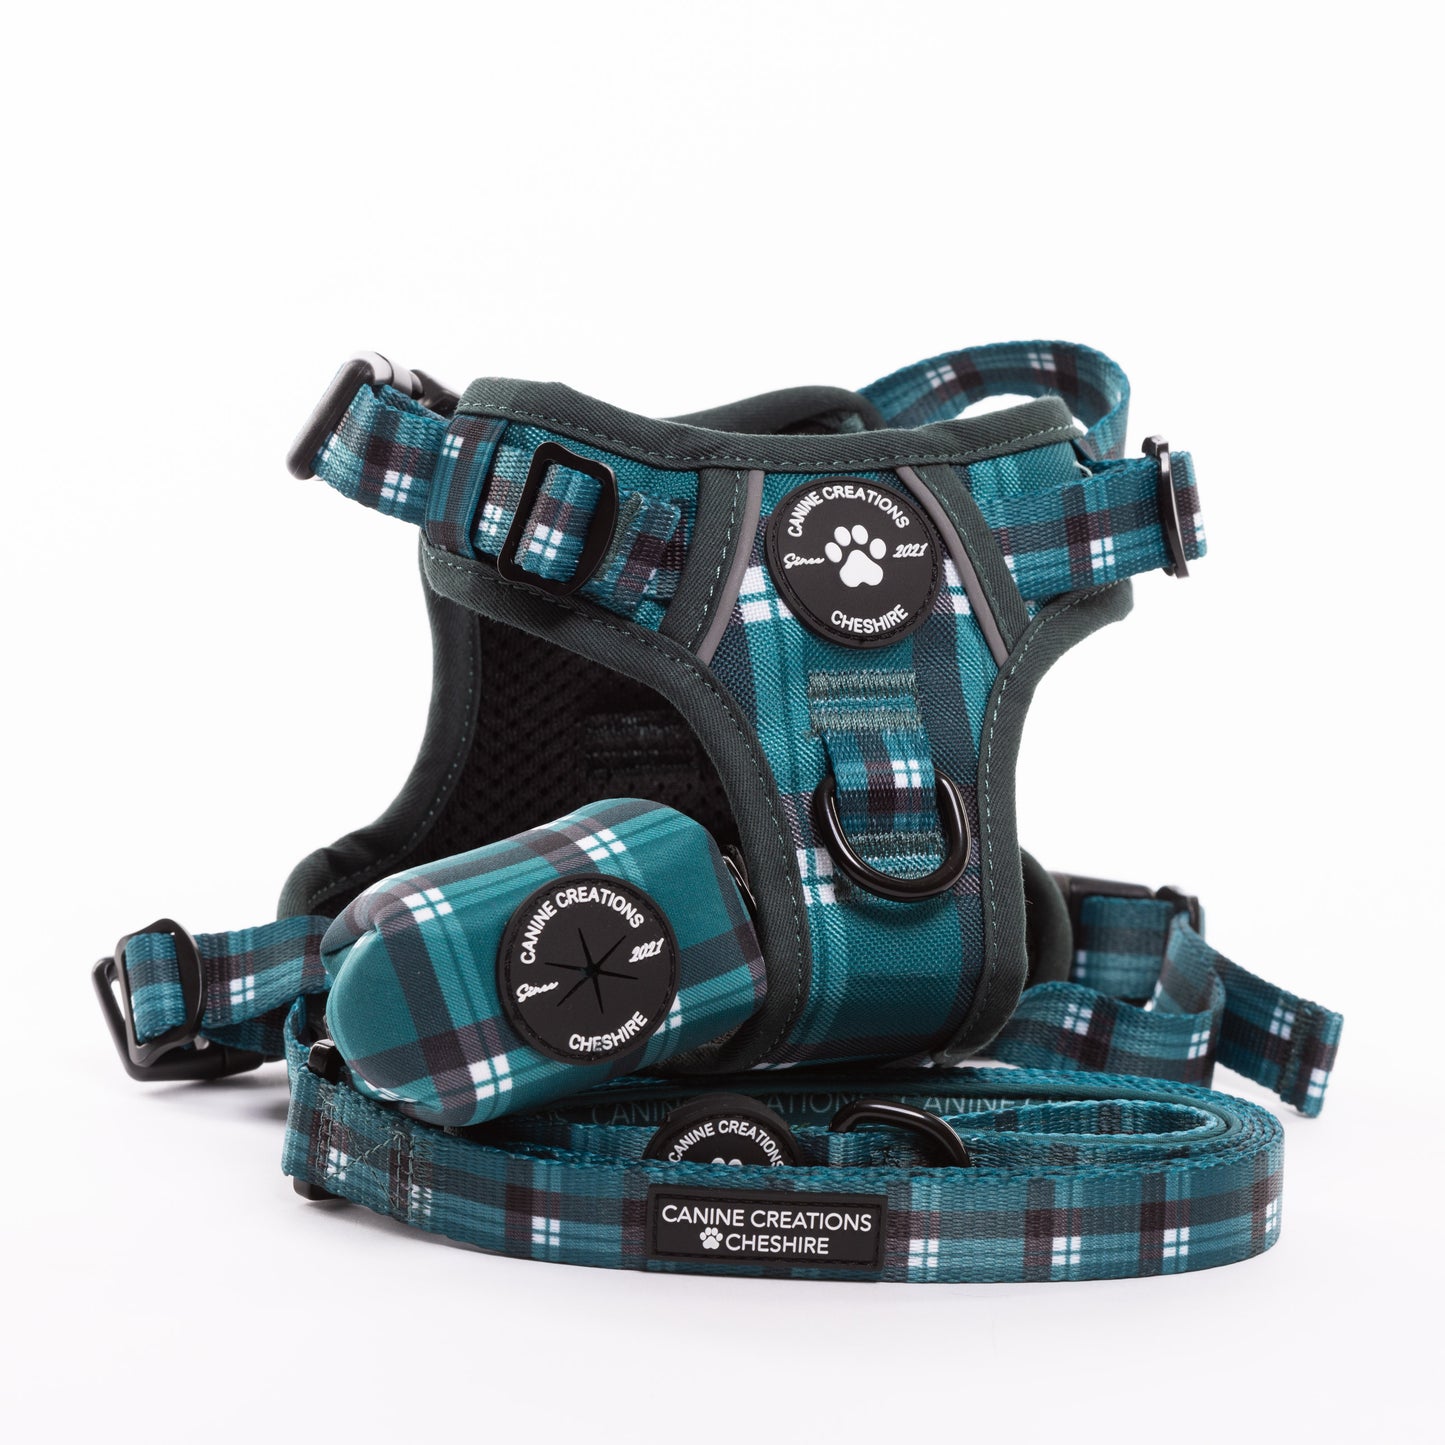 The Chequered Harness